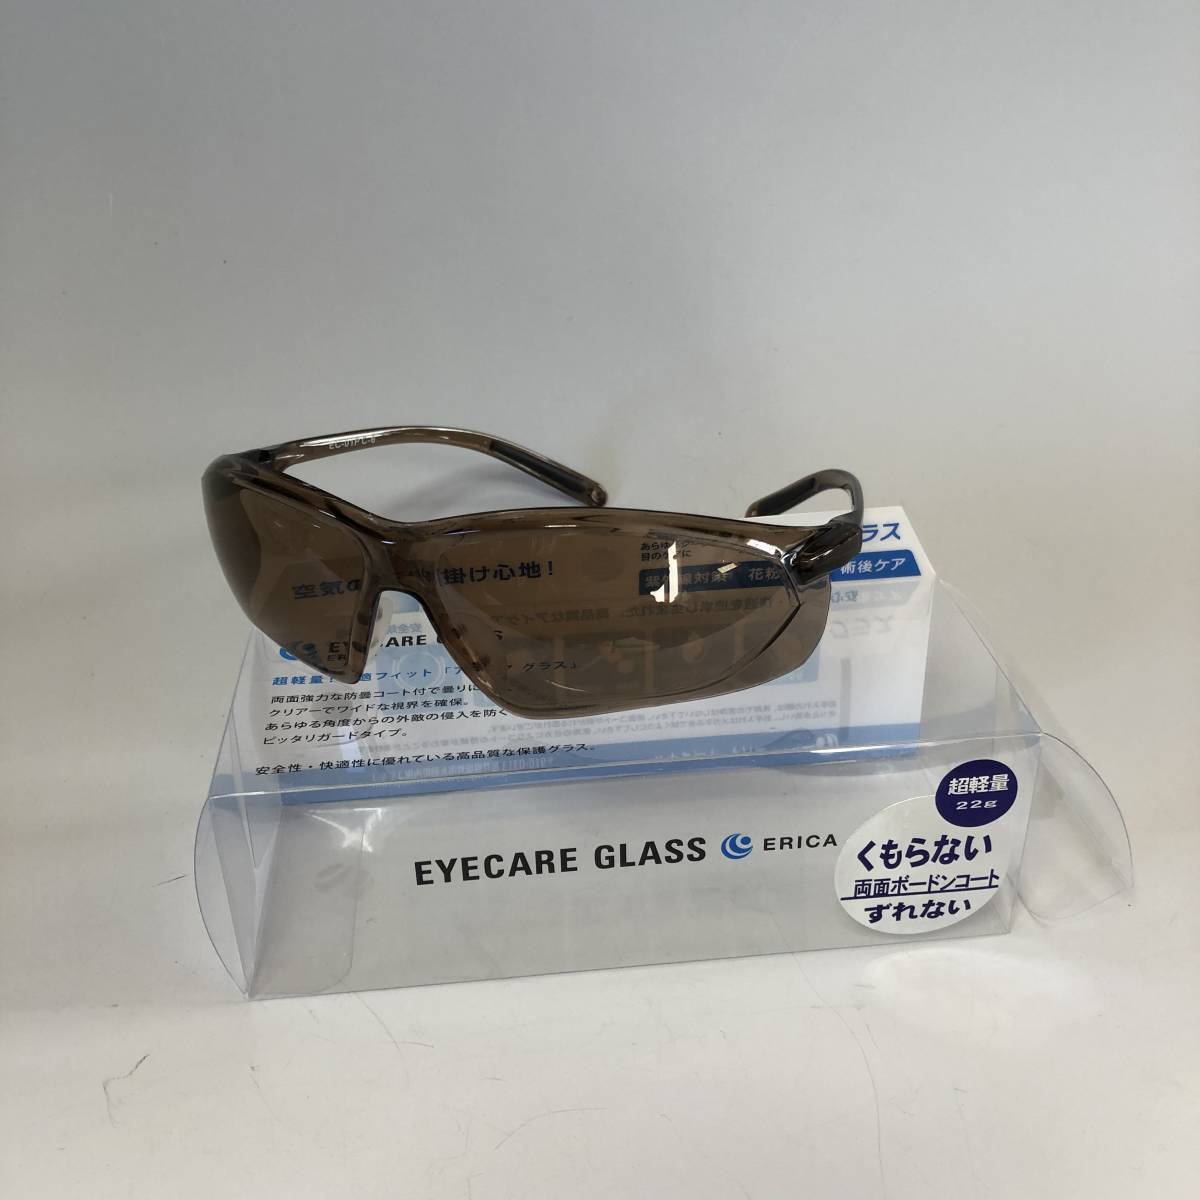 * ultra-violet rays measures * pollen measures *. after care *EYE CARE GLASS-PREMIUM- 1 pcs *EYE CARE GLASS -4ps.@*5 pcs set ** free shipping *